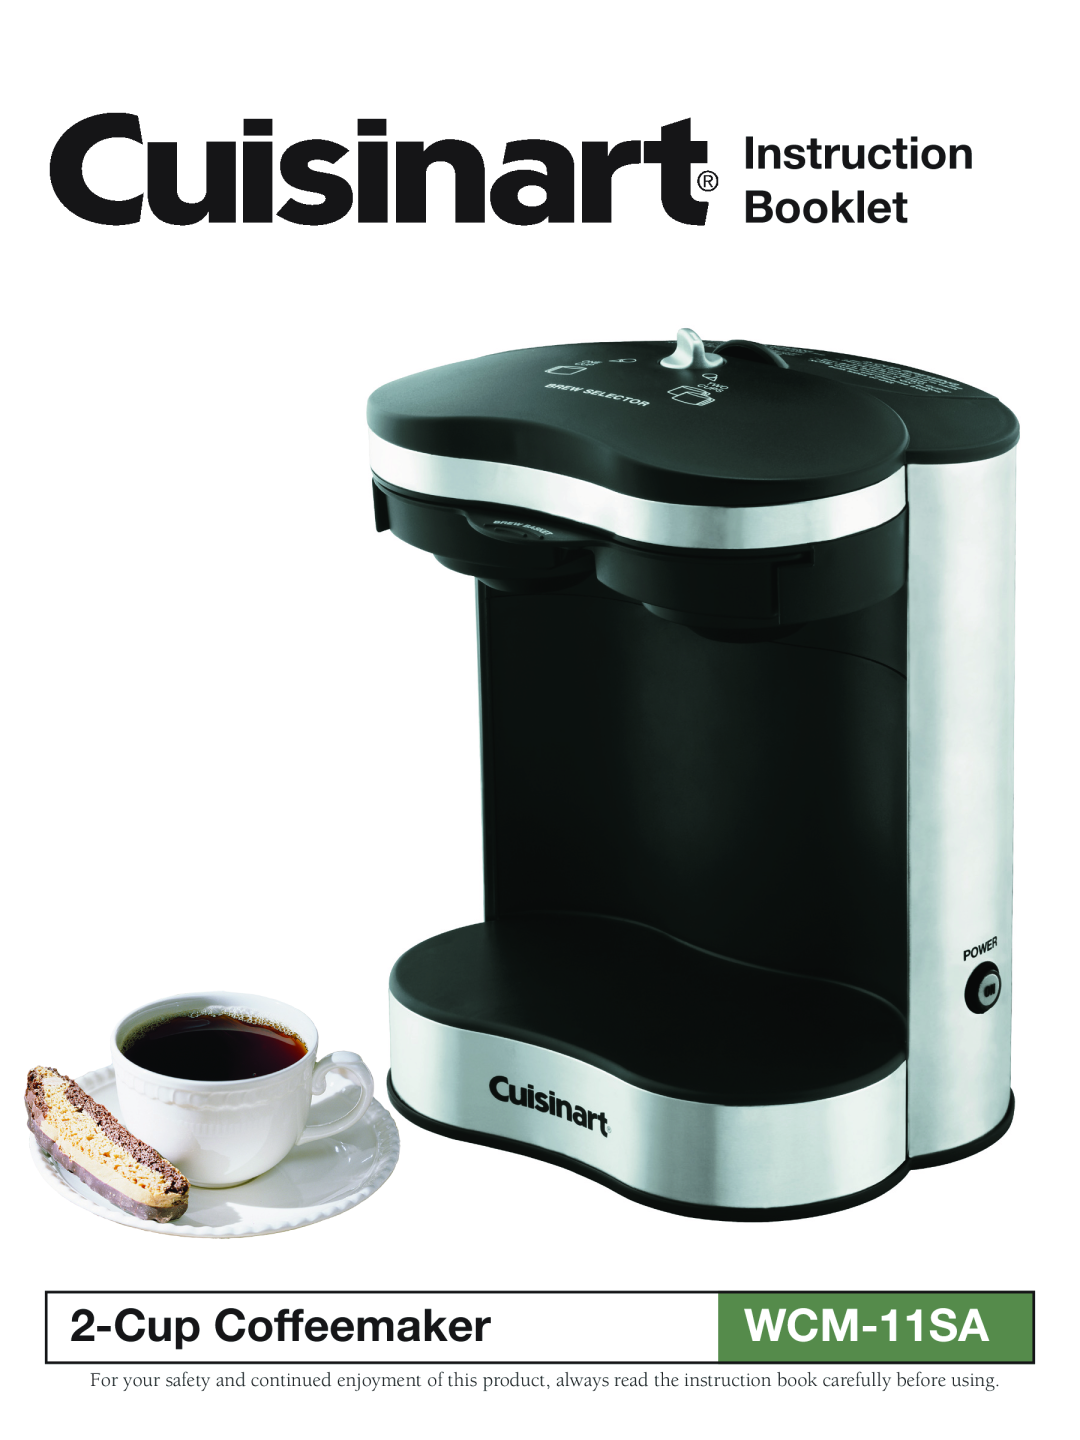 Cuisinart WCM-11SA manual Instruction Booklet, Cup Coffeemaker 